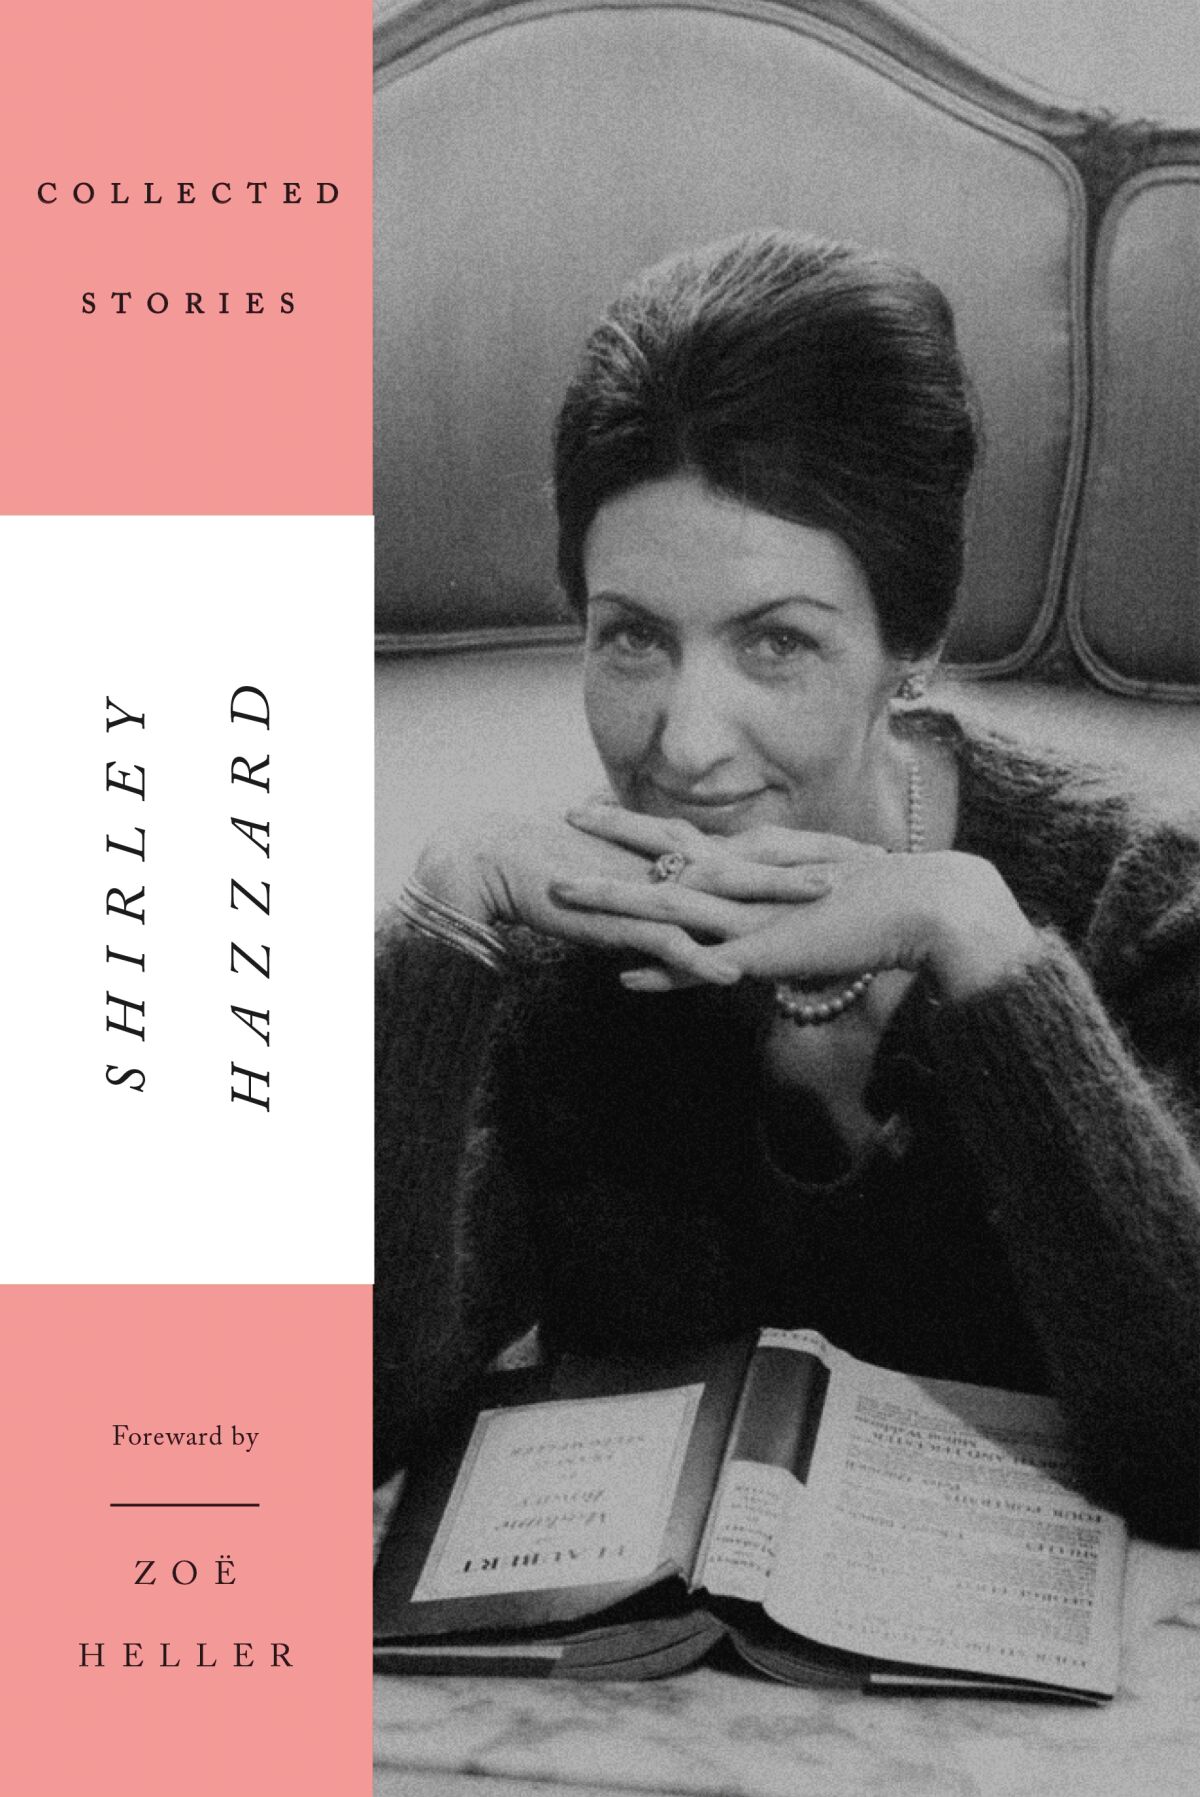 The jacket cover of "Collected Stories" by Shirley Hazzard.